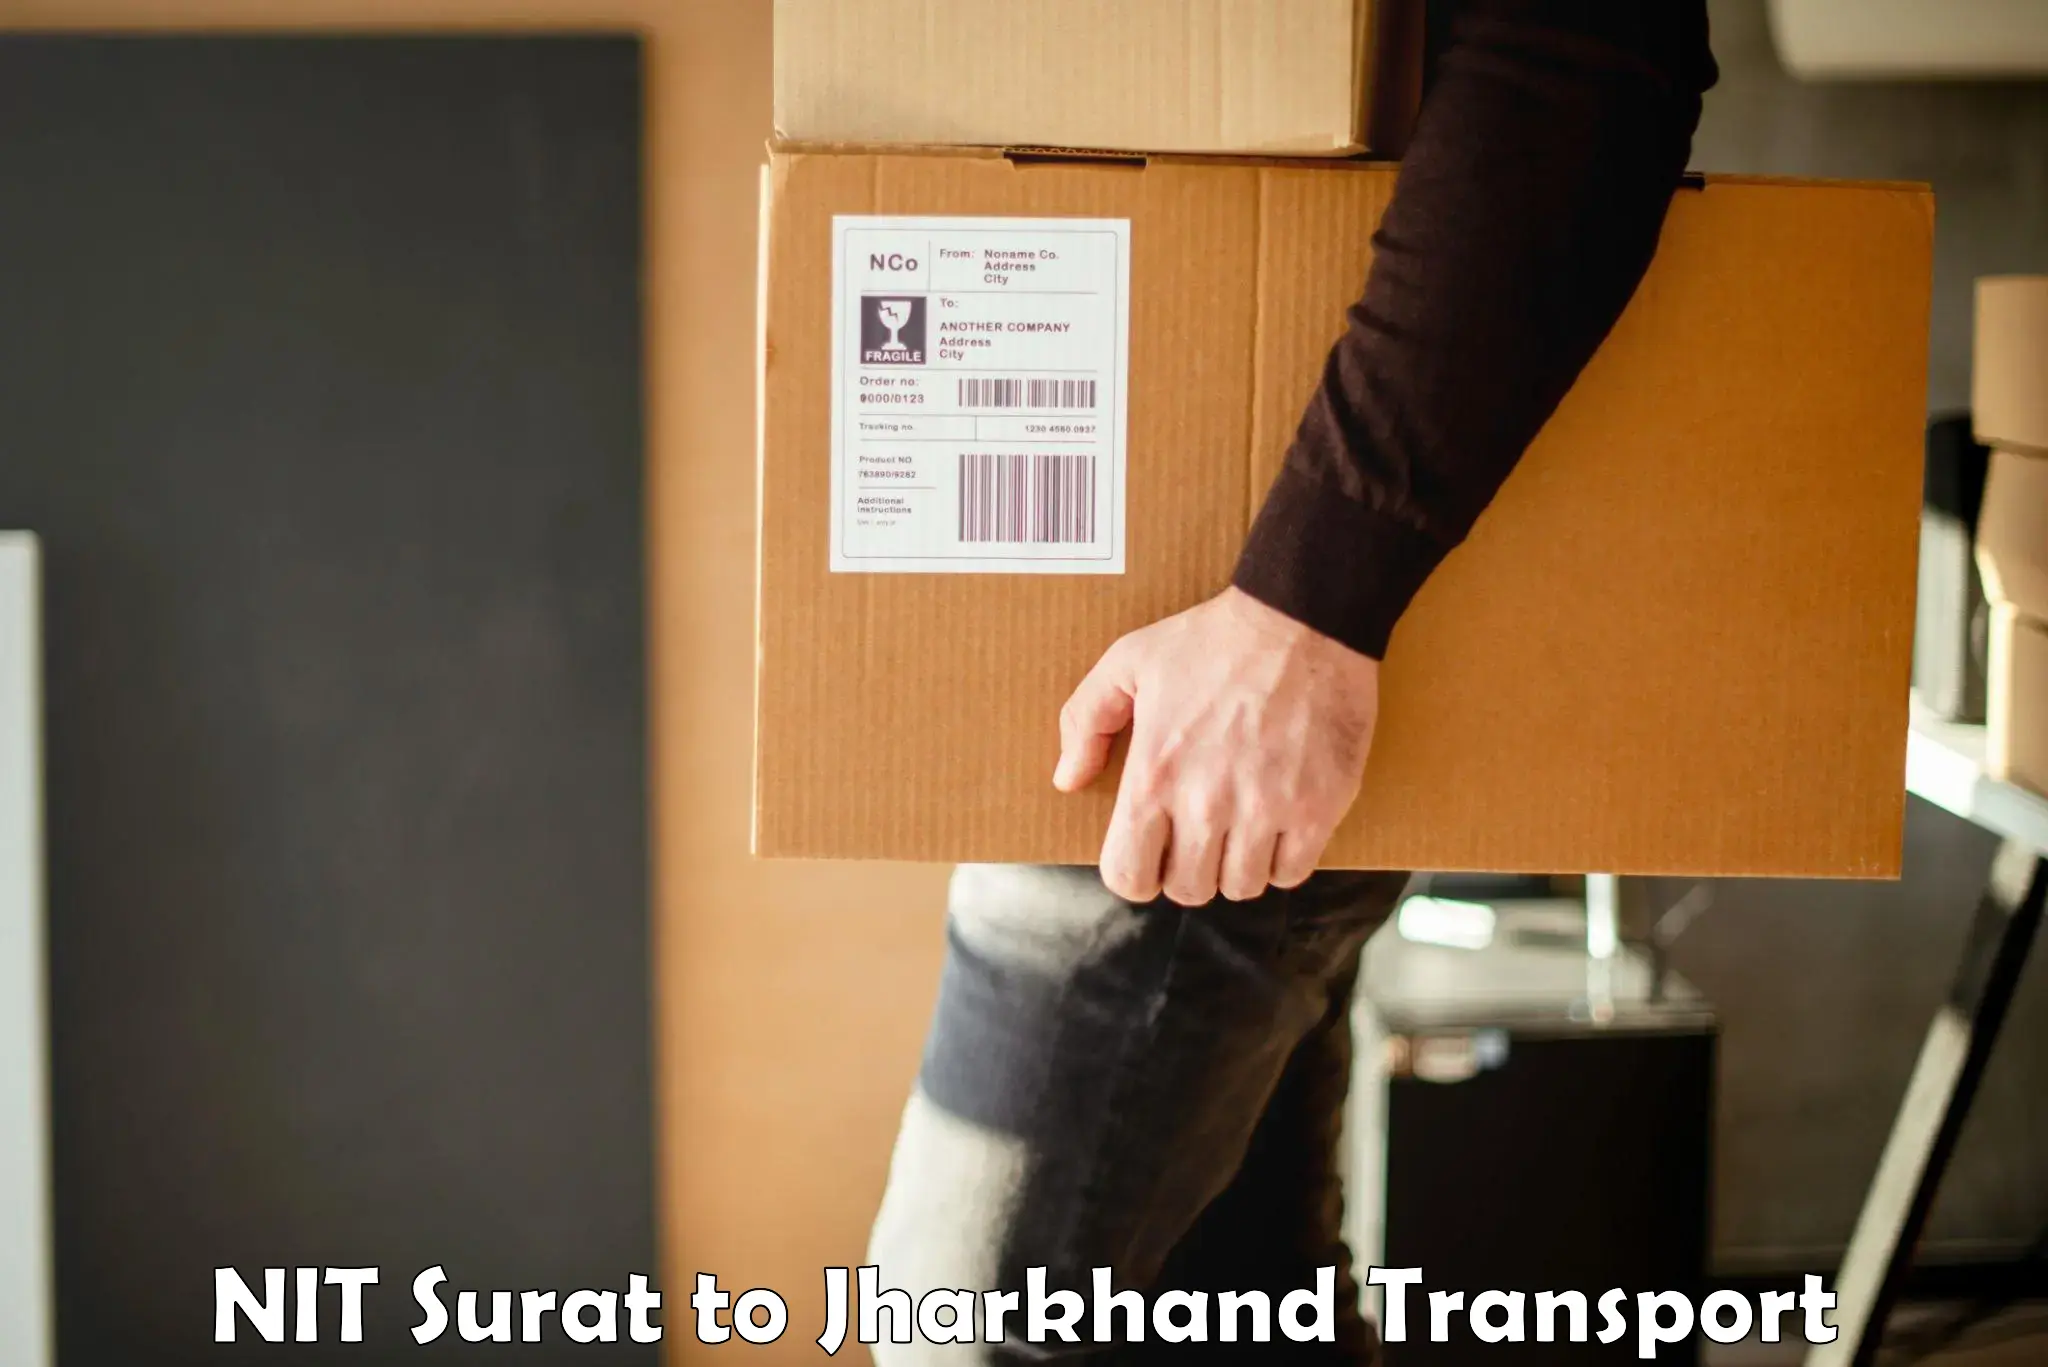 Cargo train transport services NIT Surat to Chouparan